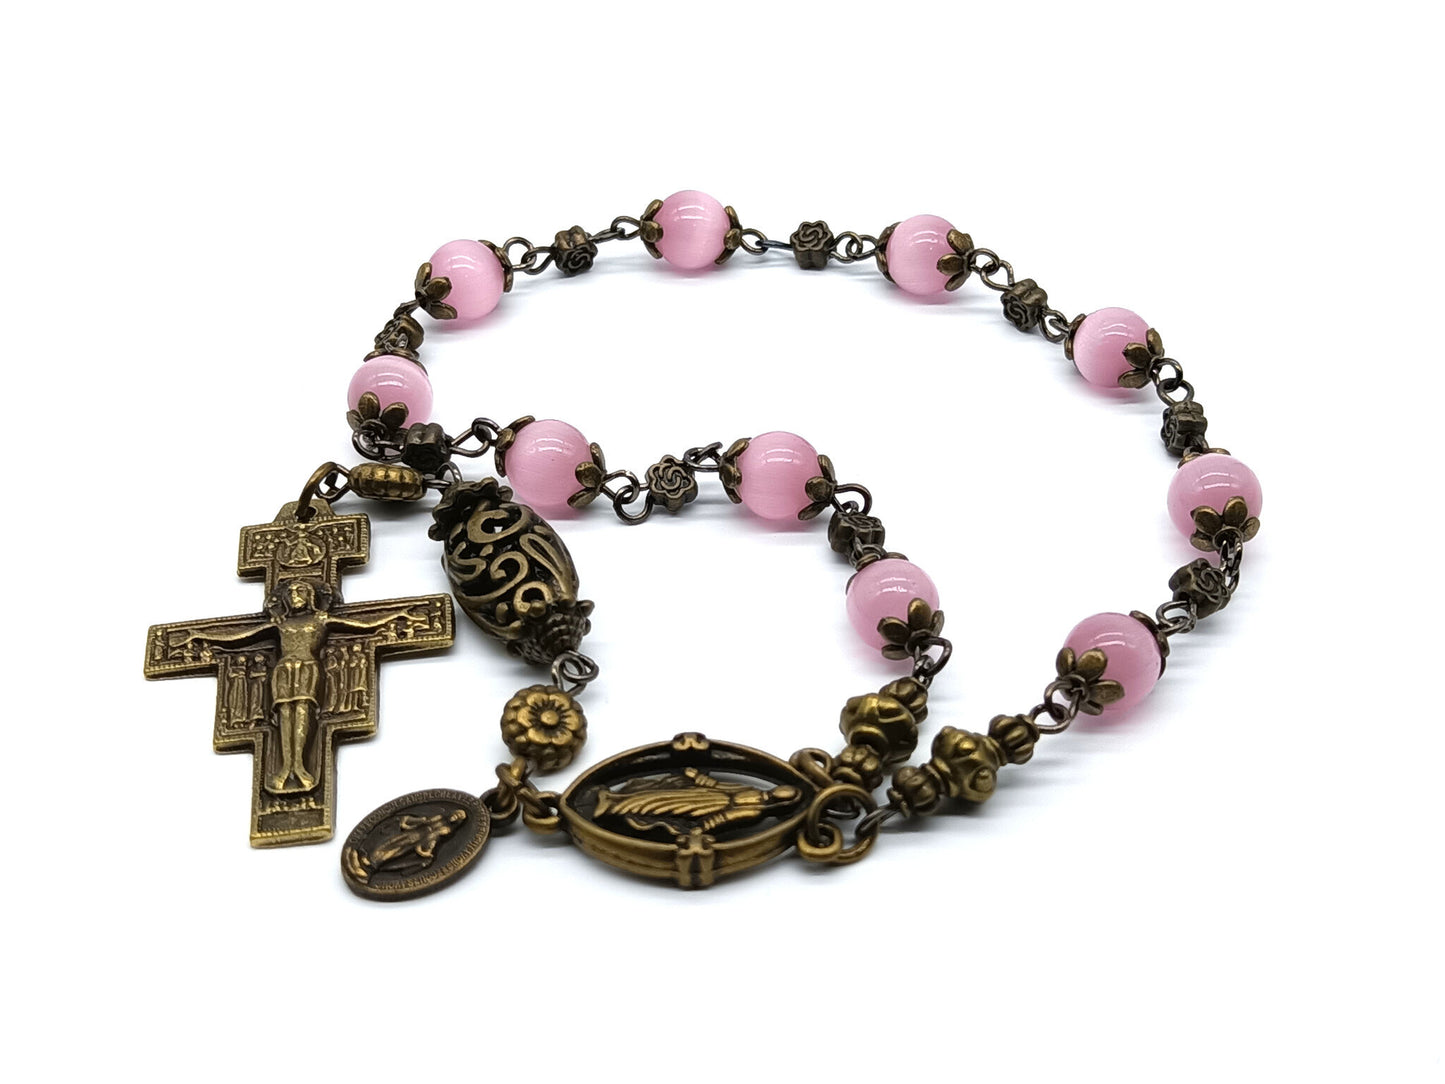 Miraculous medal unique rosary beads single decade with pink glass beads, bronze St. Francis crucifix, bead caps and centre medal.